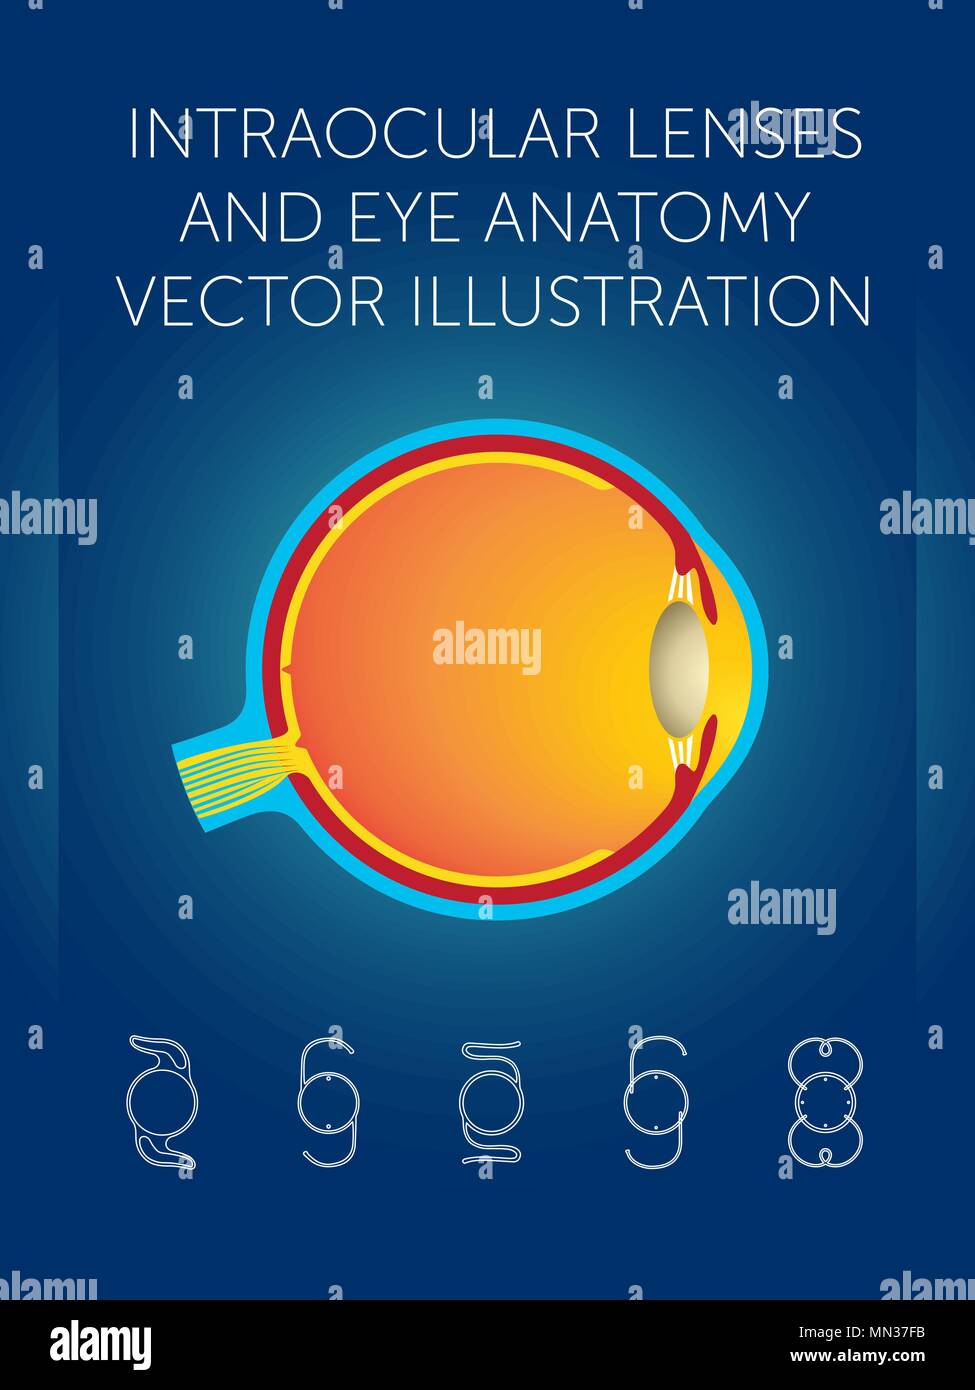 Schematic structure of eye and types of intraocular lenses on blue background Stock Vector